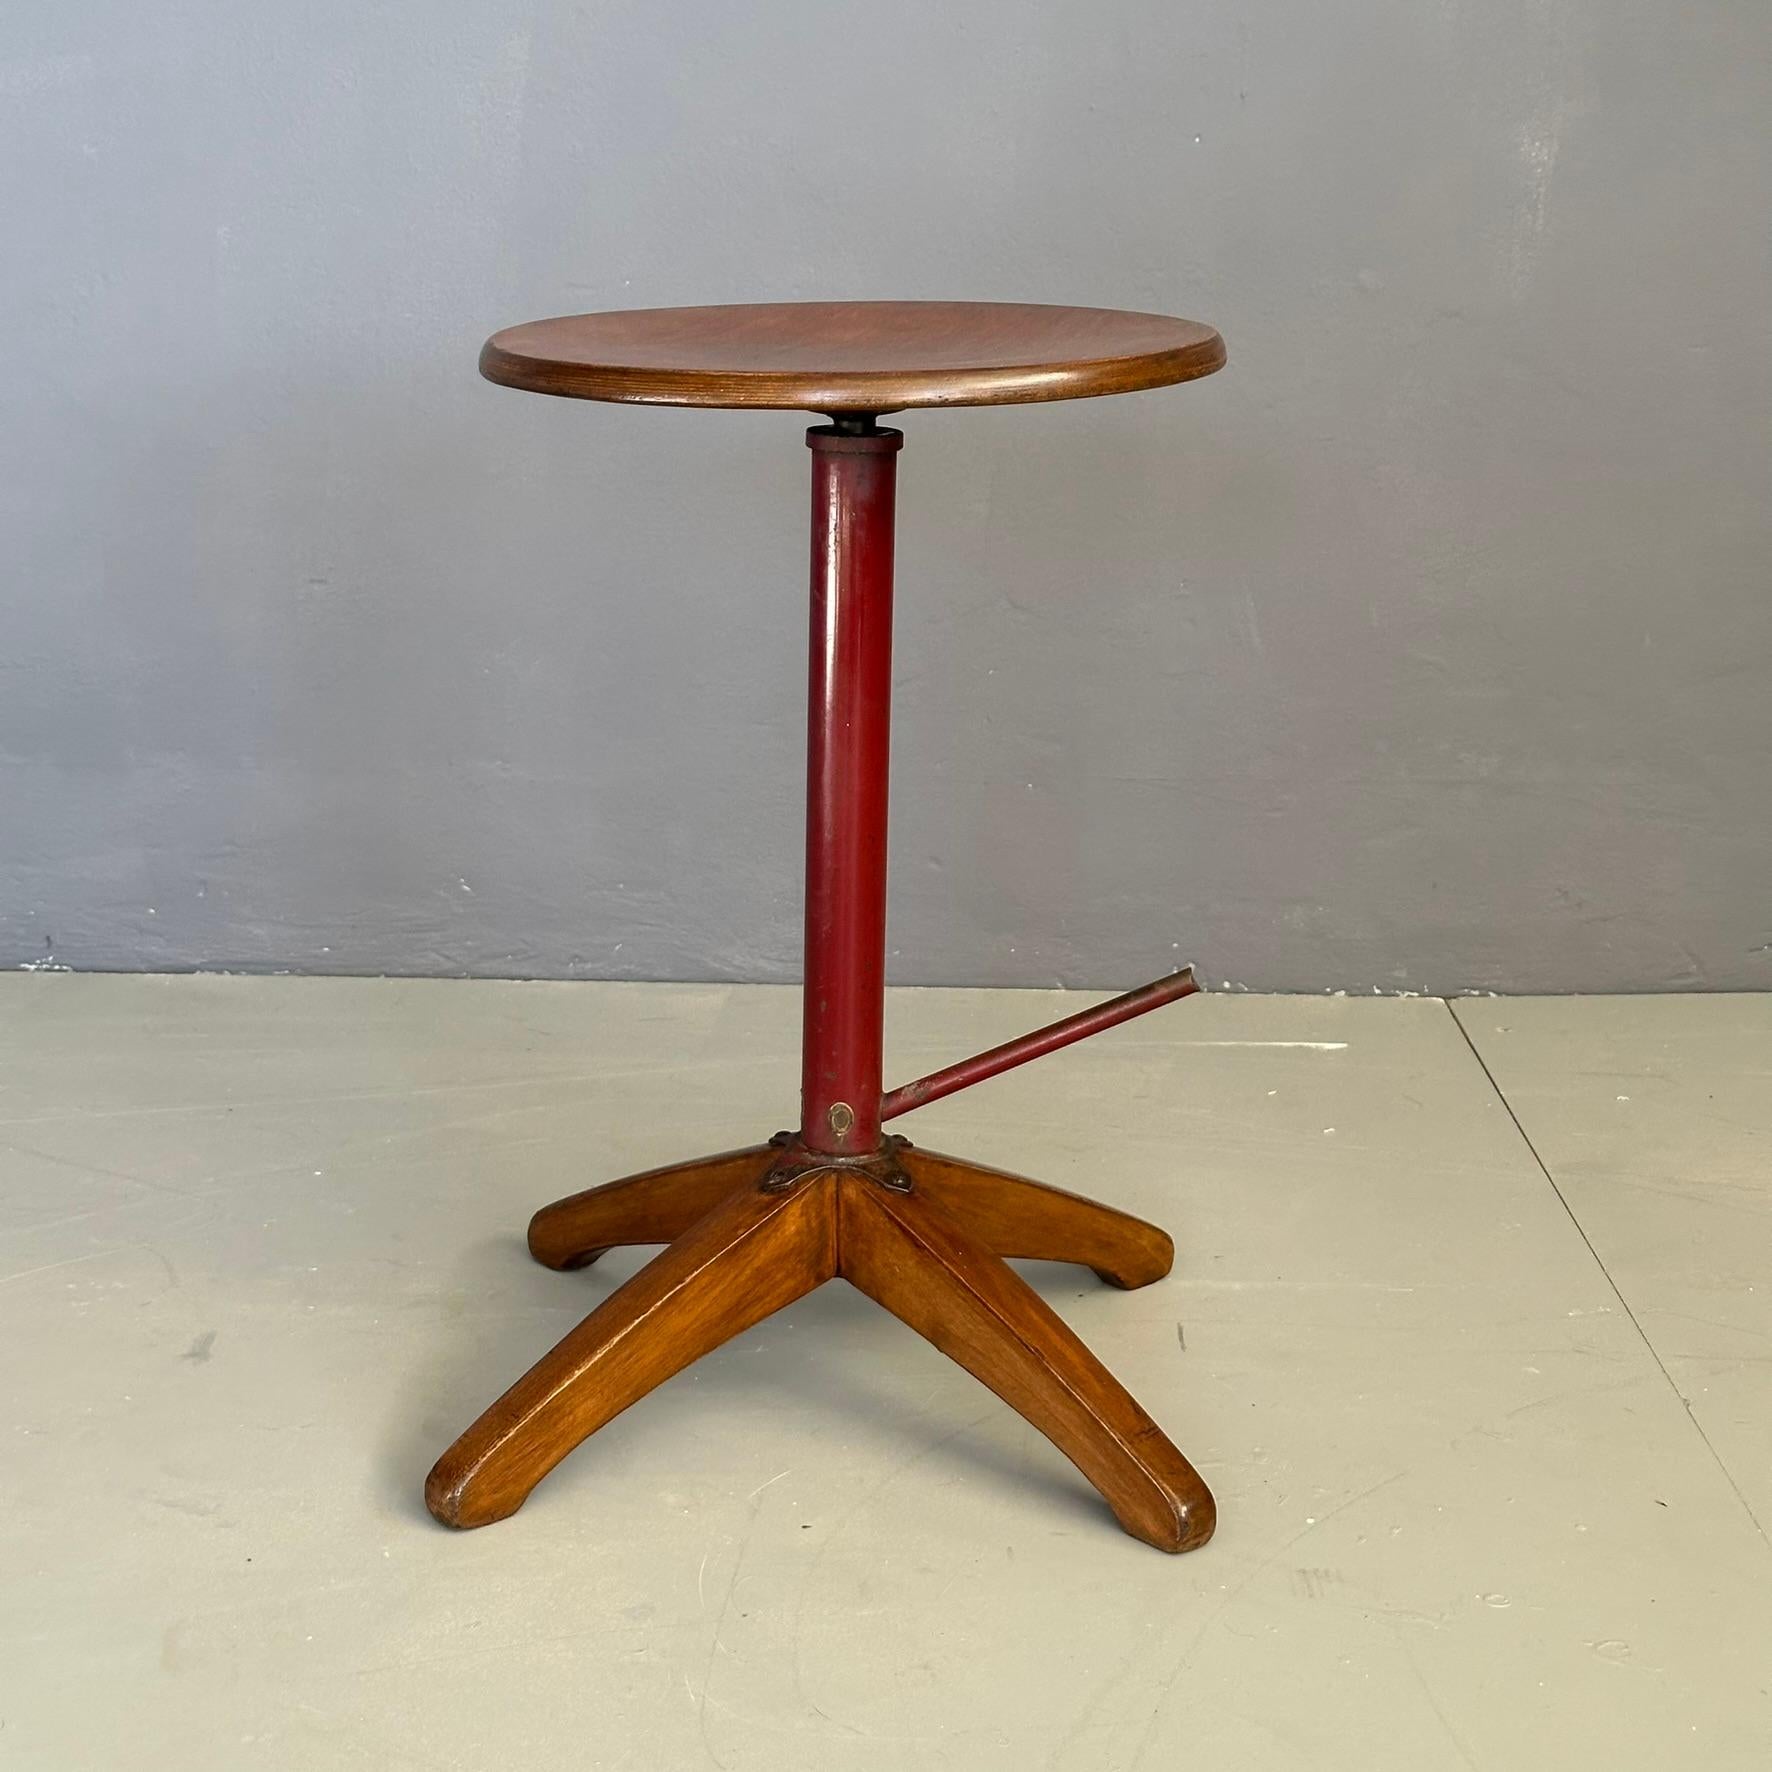 Stool from the fifties and sixties, Italian manufacturing.
Stool with wooden seat and red iron floor stand. 
The height is adjustable via a screw, which allows adjustment of the seat height.
Modern design
The stool is been restored
Misurements: